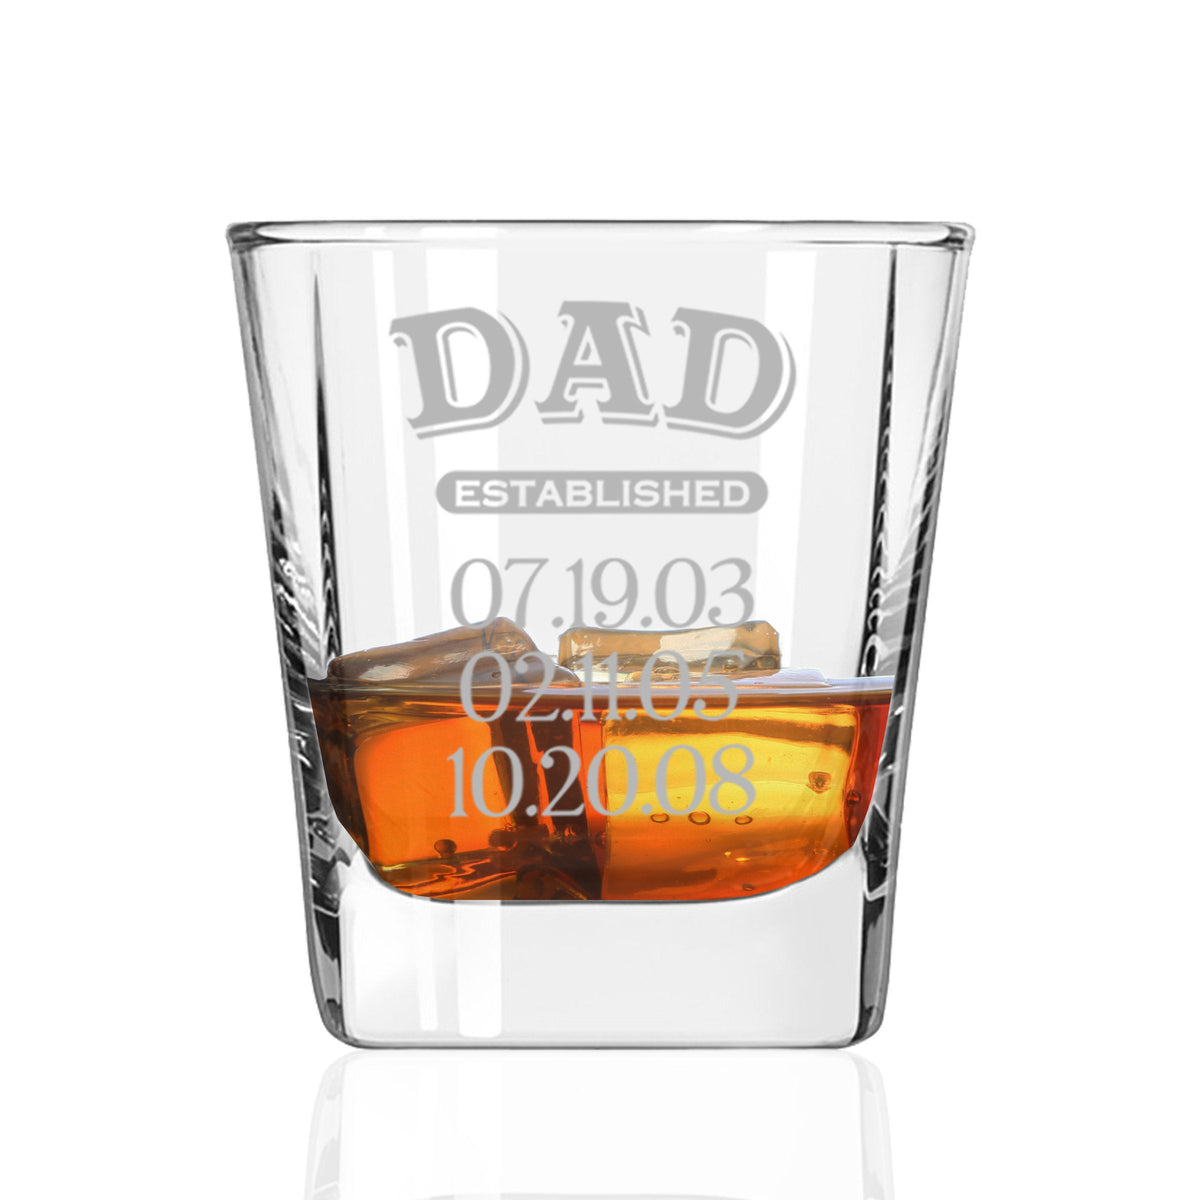 Personalized Dad Established Whiskey Glasses/Engraved Rocks Glass 9.25 oz. Dads whiskey glass, Engraved whiskey glass, Gift for Dad - RCH Gifts